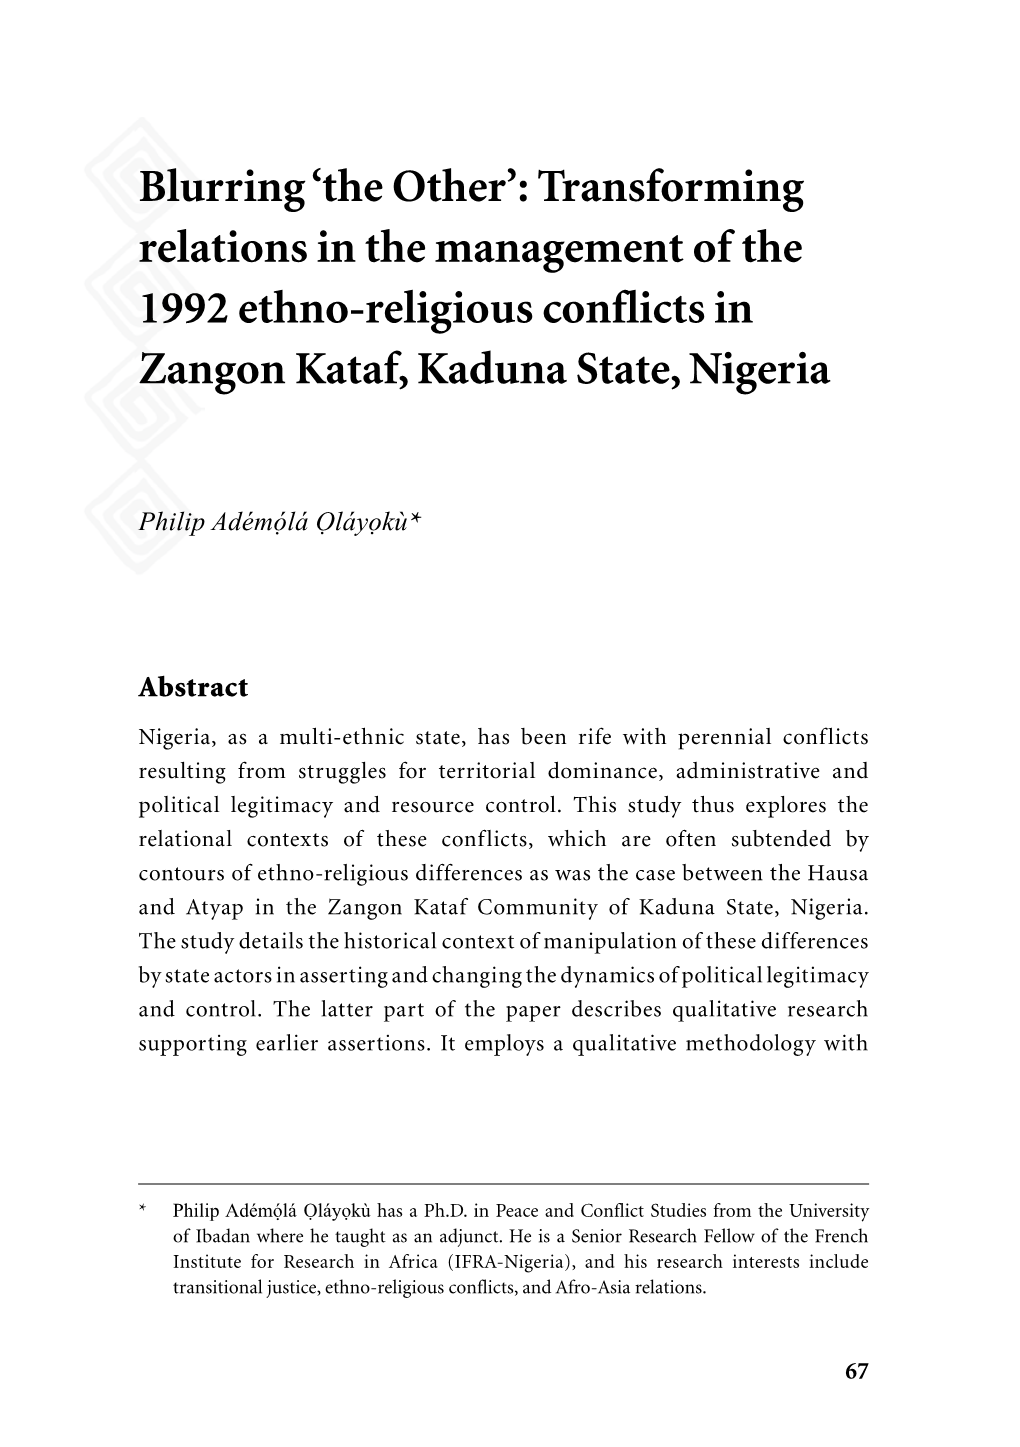 Transforming Relations in the Management of the 1992 Ethno-Religious Conflicts in Zangon Kataf, Kaduna State, Nigeria